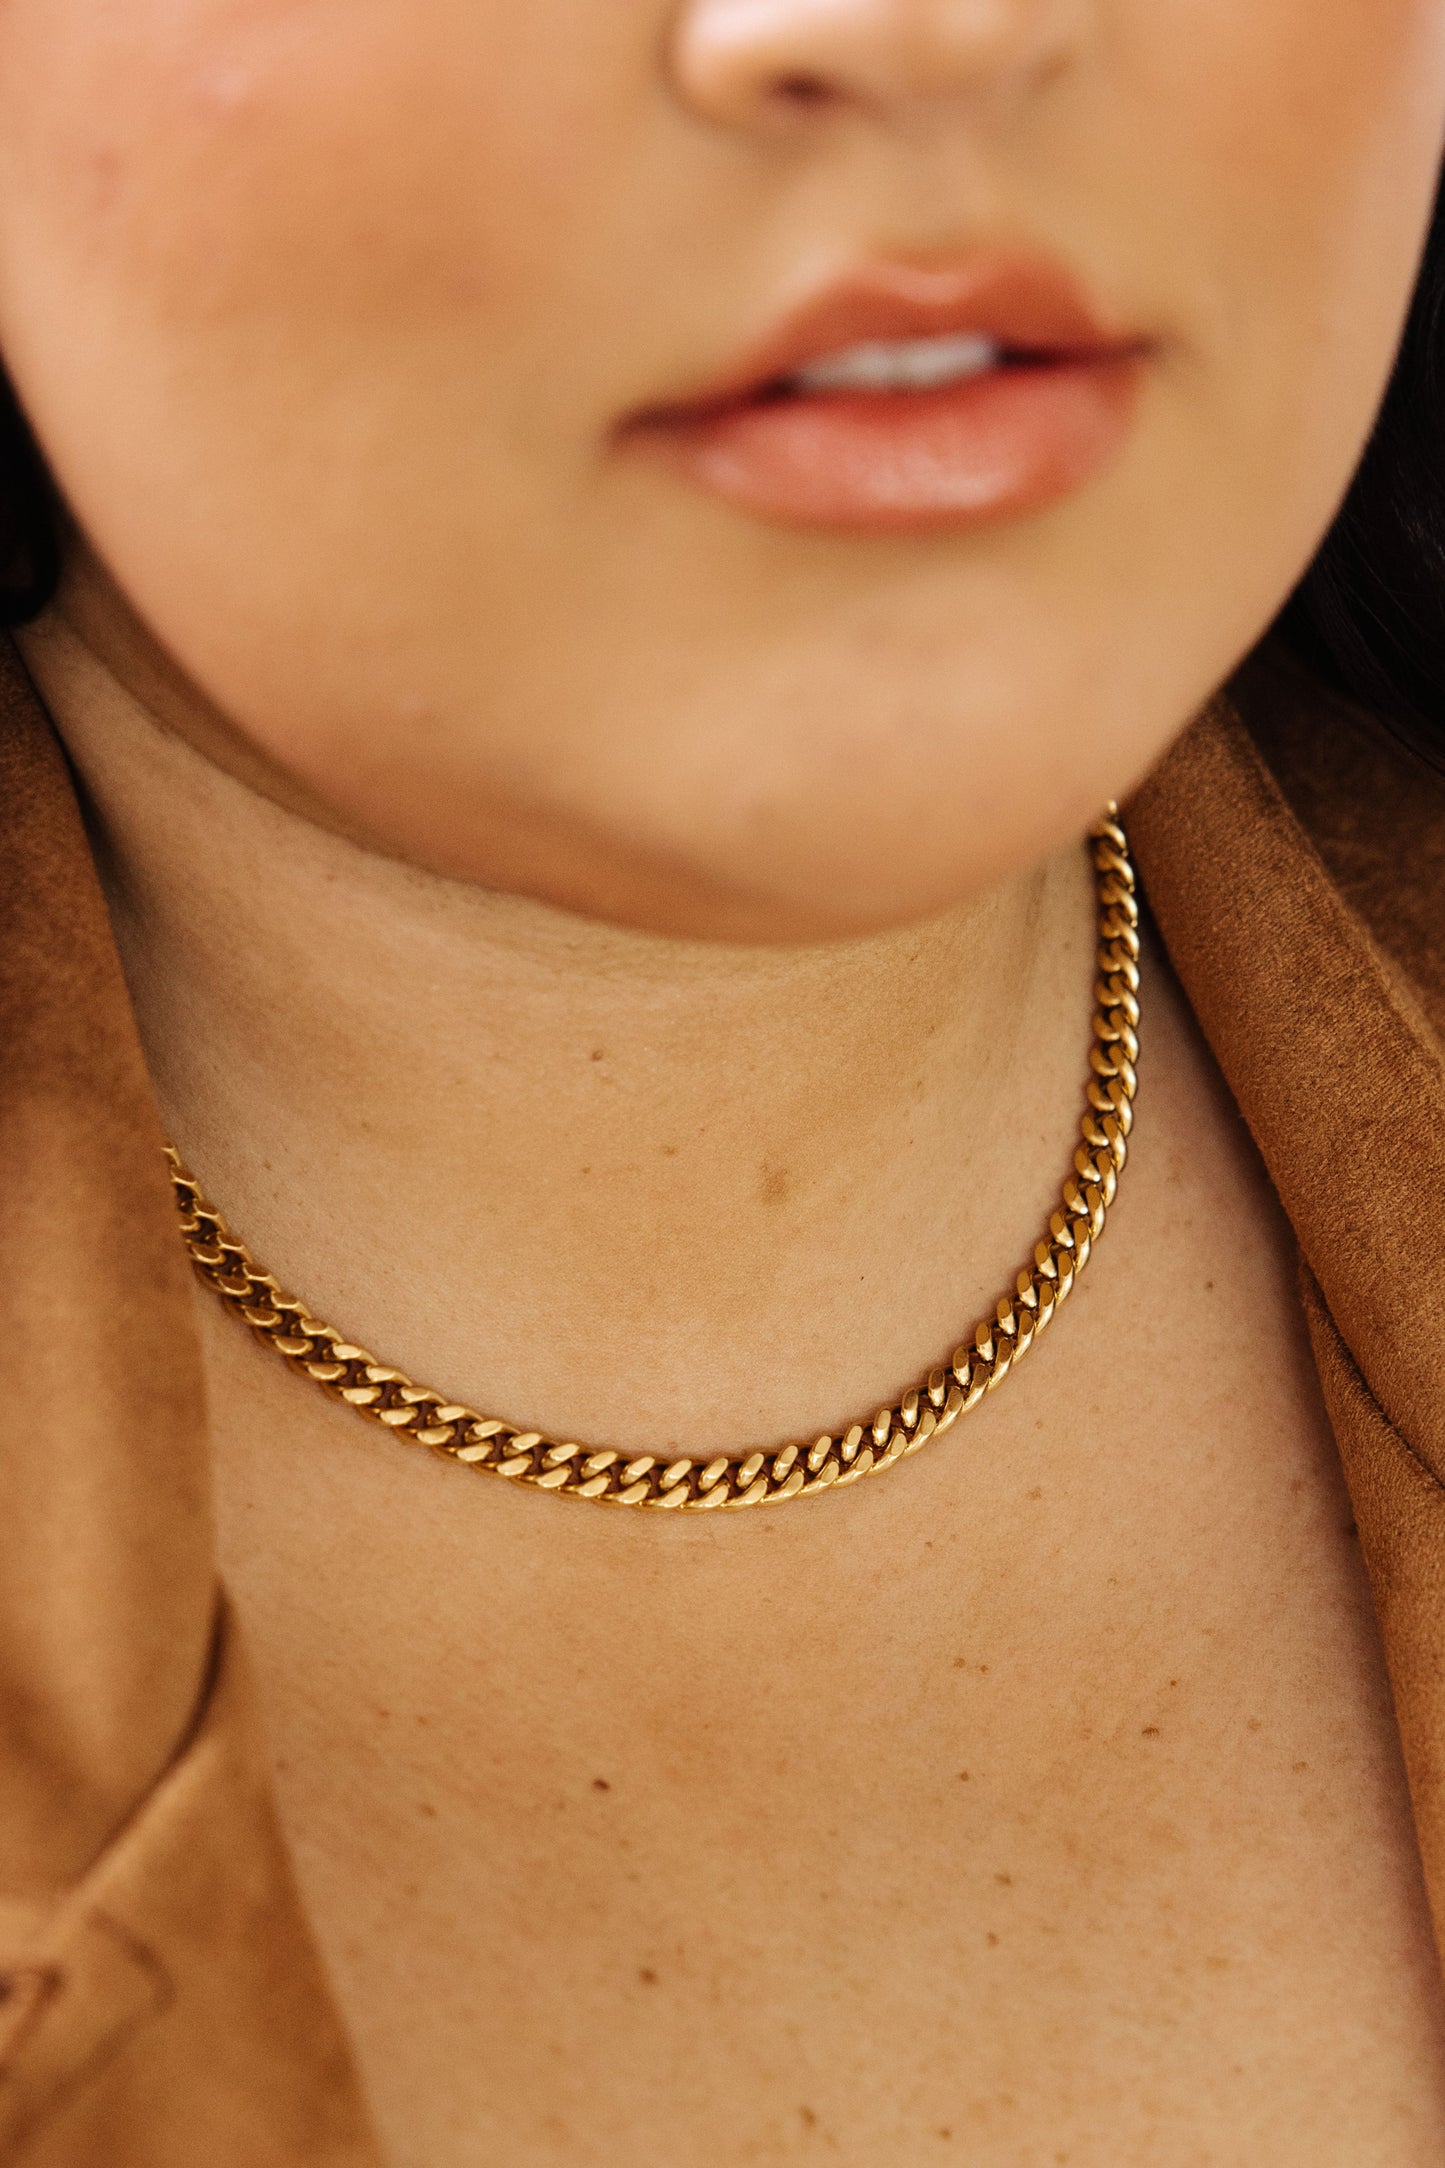 Introducing the Chain Reaction Gold Plated Choker! Crafted with 18K gold plated stainless steel and a classic choker design, this necklace is a beautiful and timeless addition to any jewelry collection. The Cuban link chain ensures durability while shining for many years to come.  18K gold plated stainless steel means you can wear this piece to the beach, the pool, or even working out without worrying over tarnishing, green marks, or skin irritation.